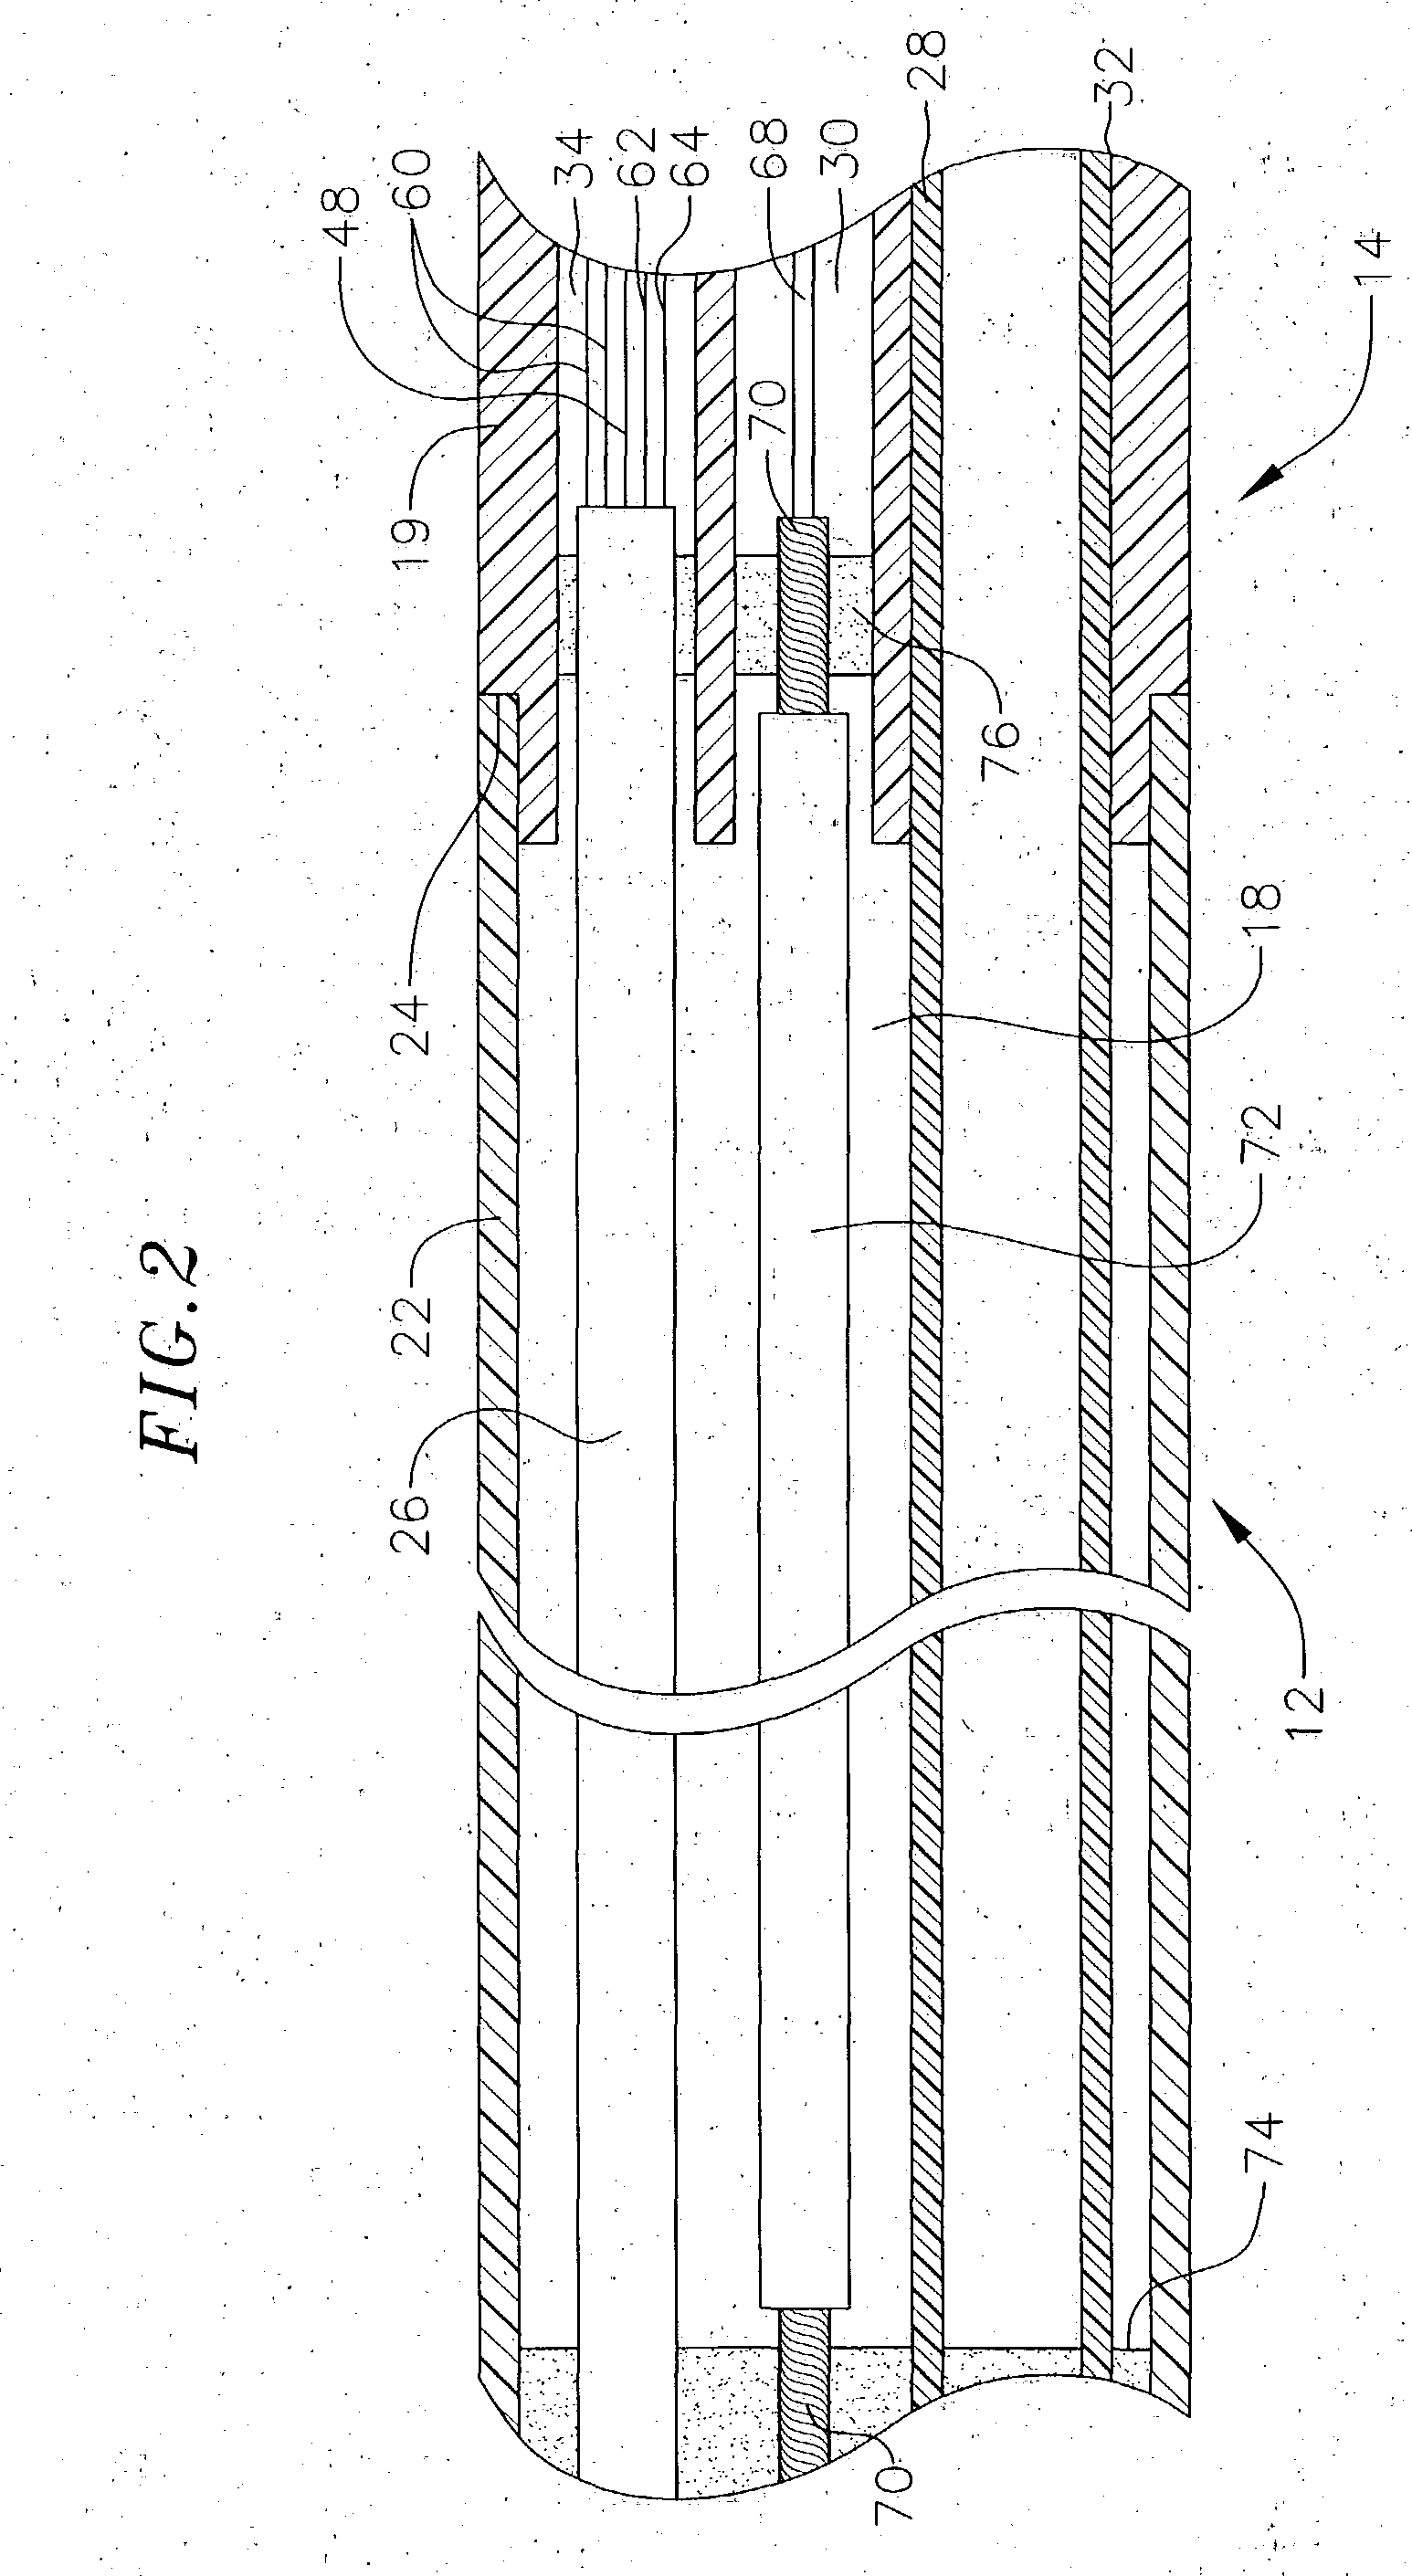 Ultrasound ablation catheter and method for its use